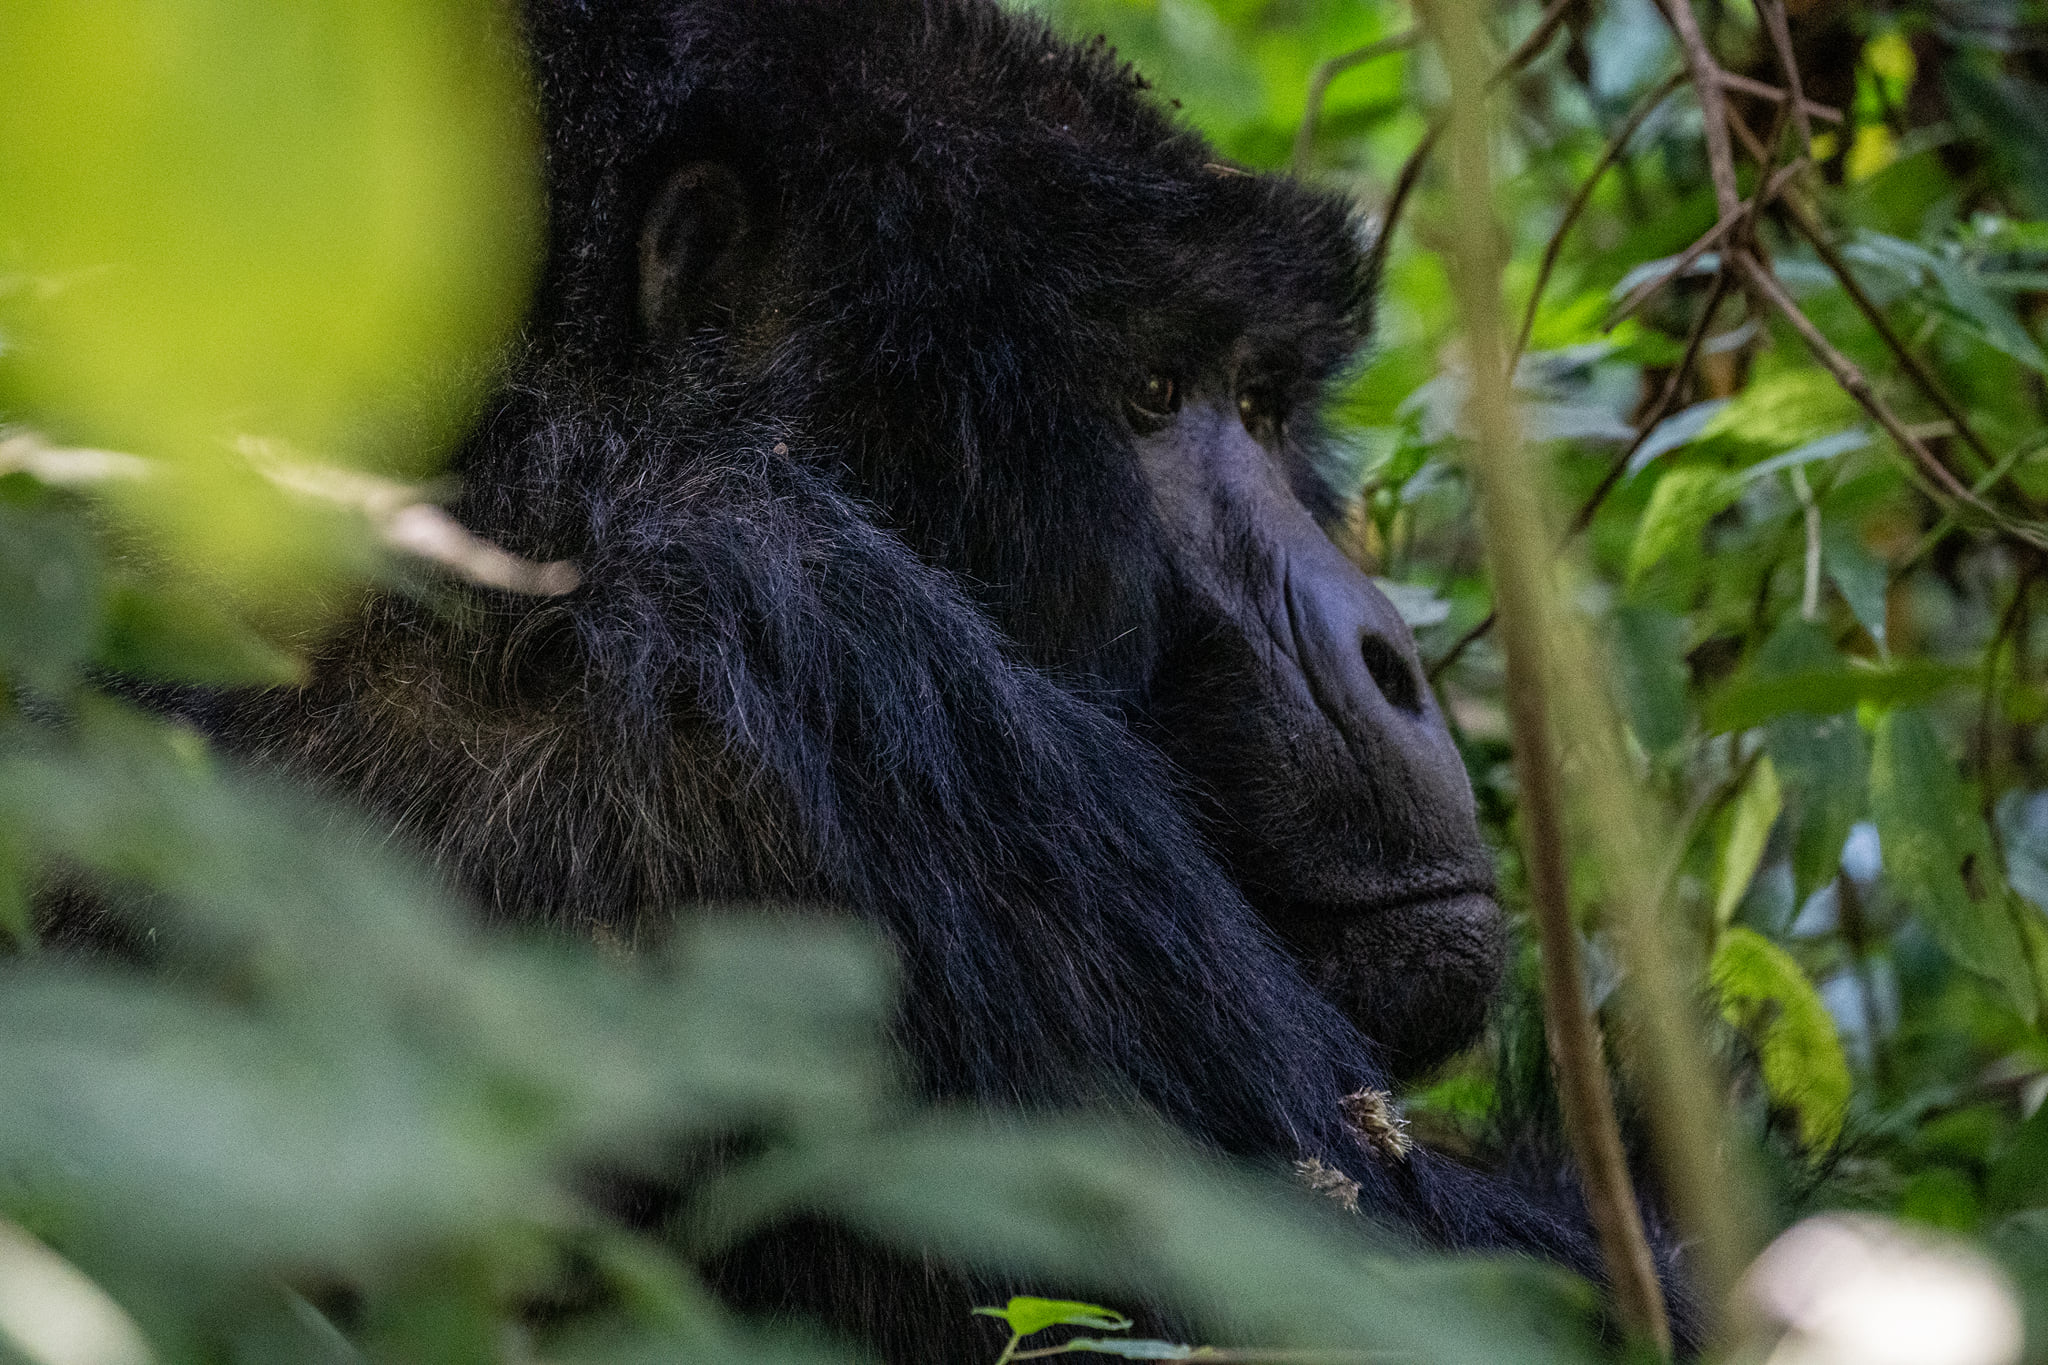 The best wildlife filming locations in the Democratic Republic of Congo